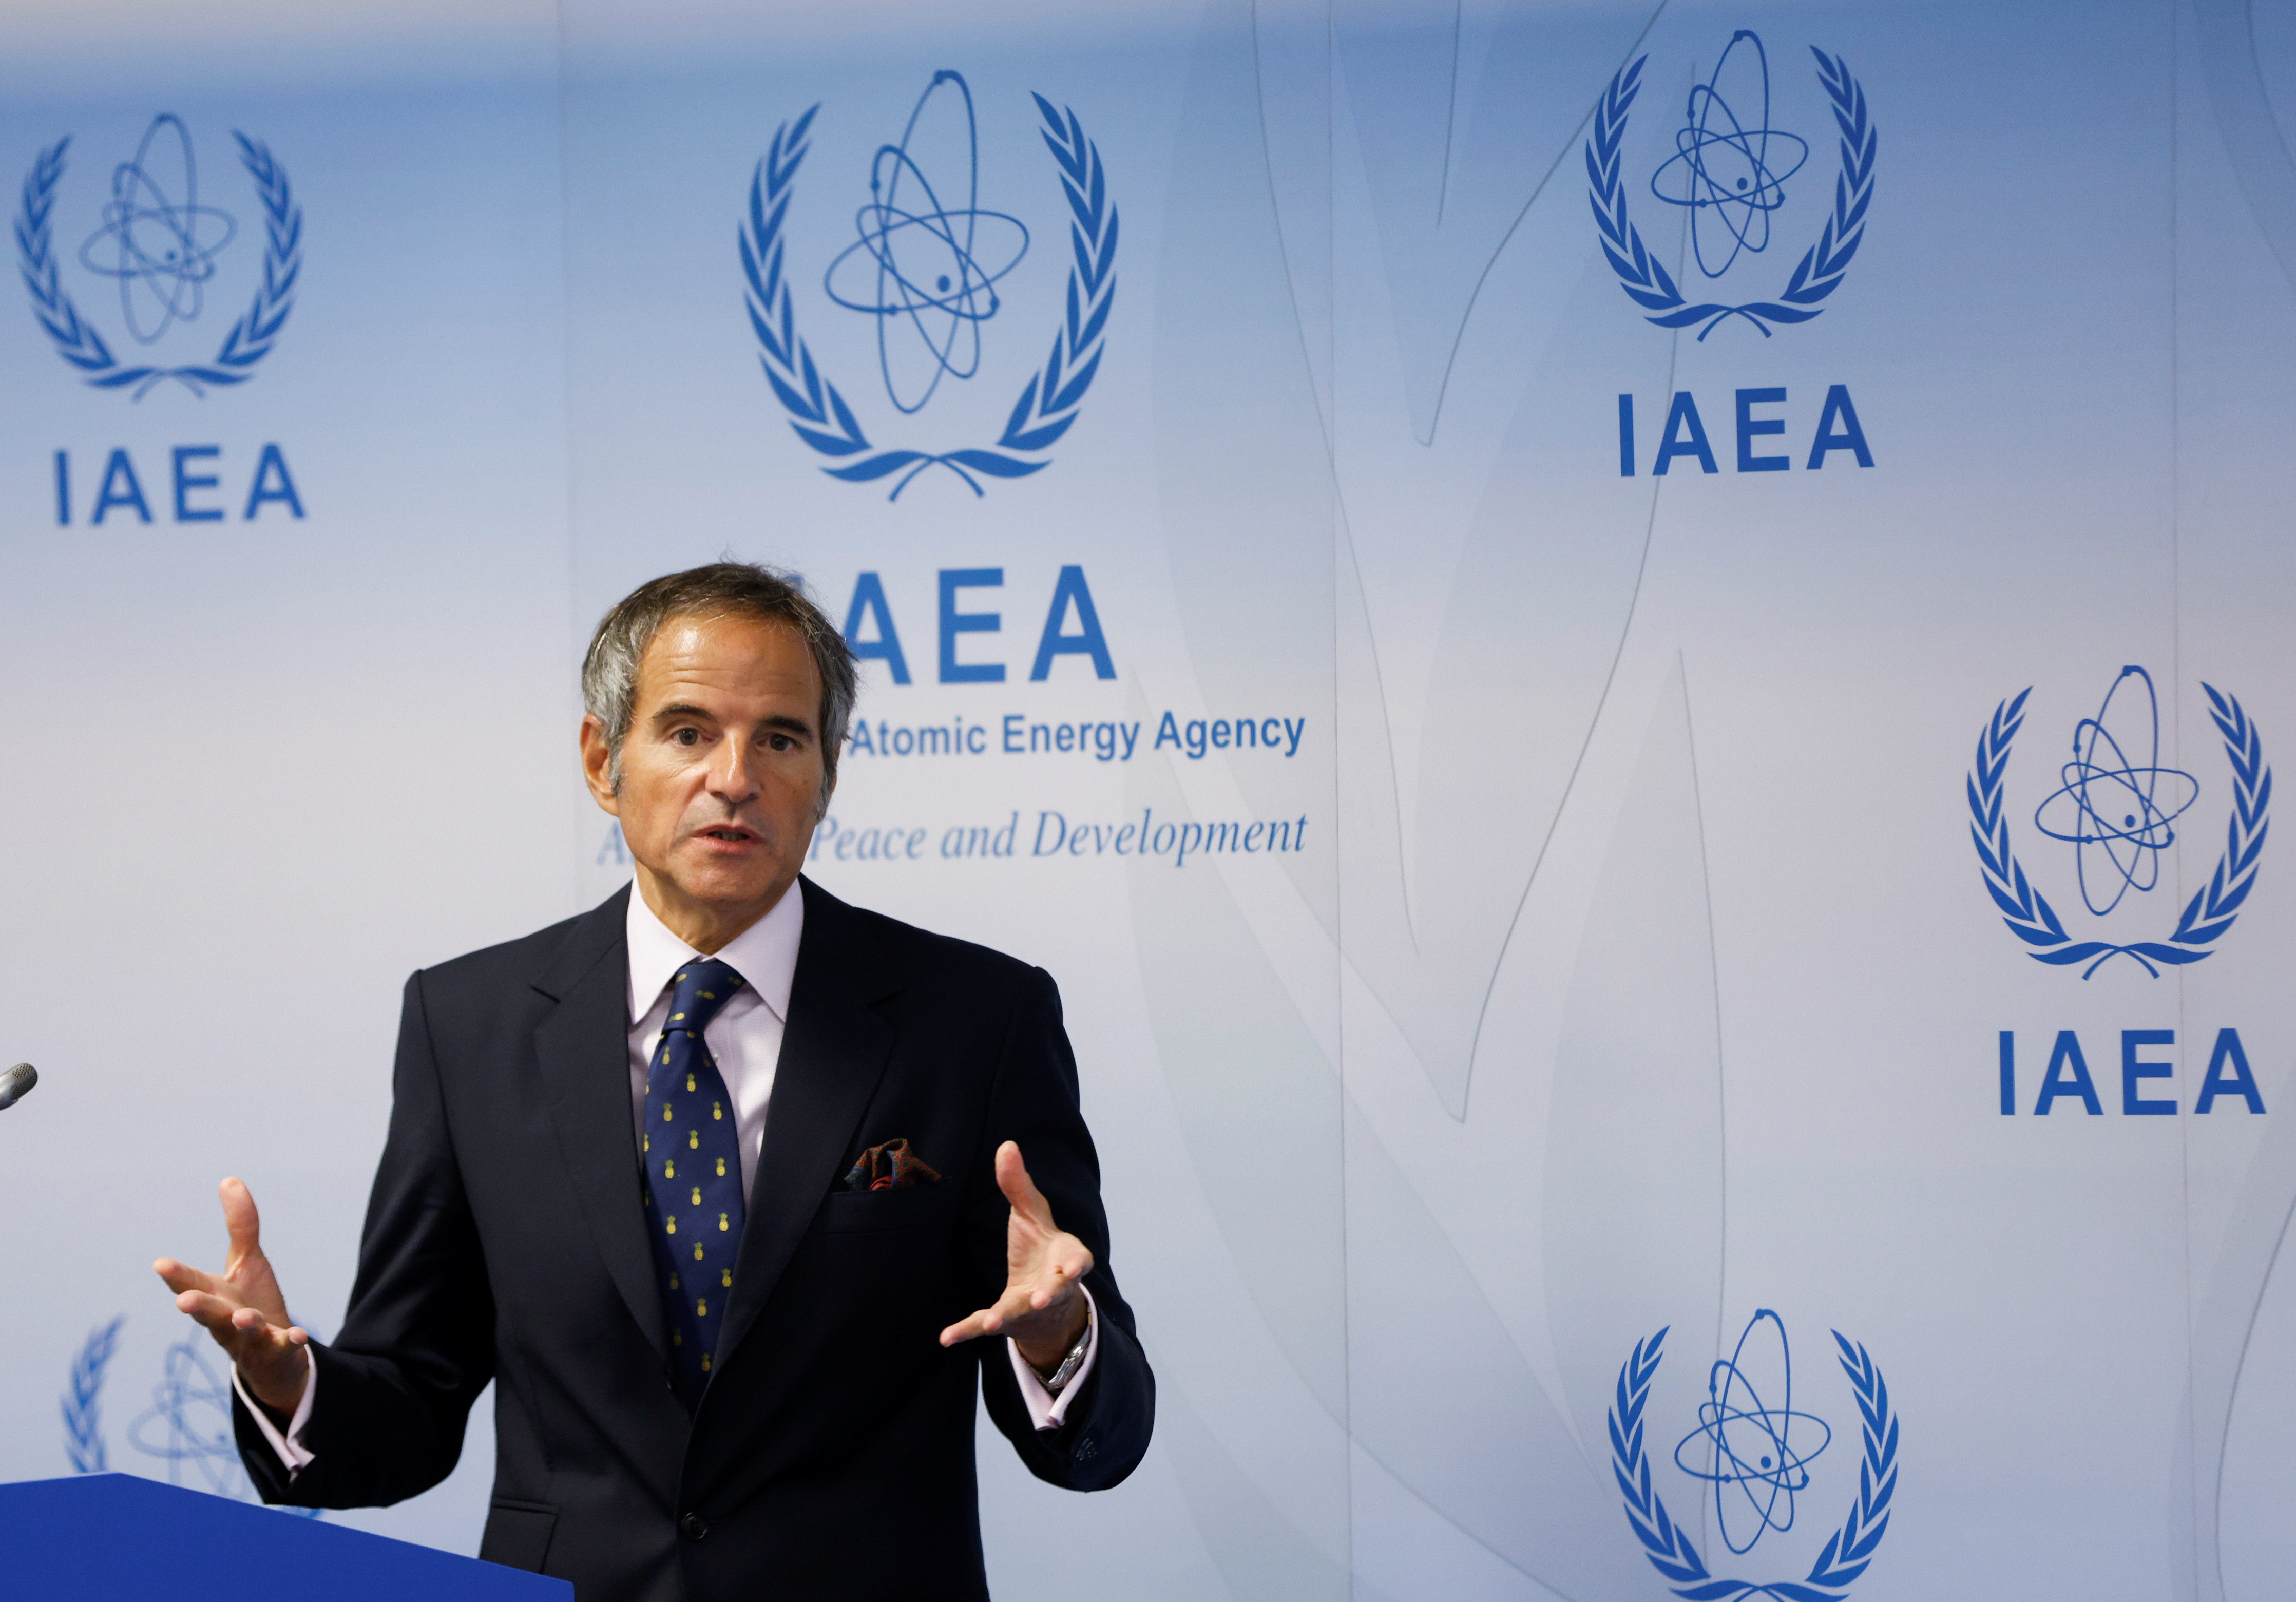 Governors meeting at the IAEA headquarters in Vienna